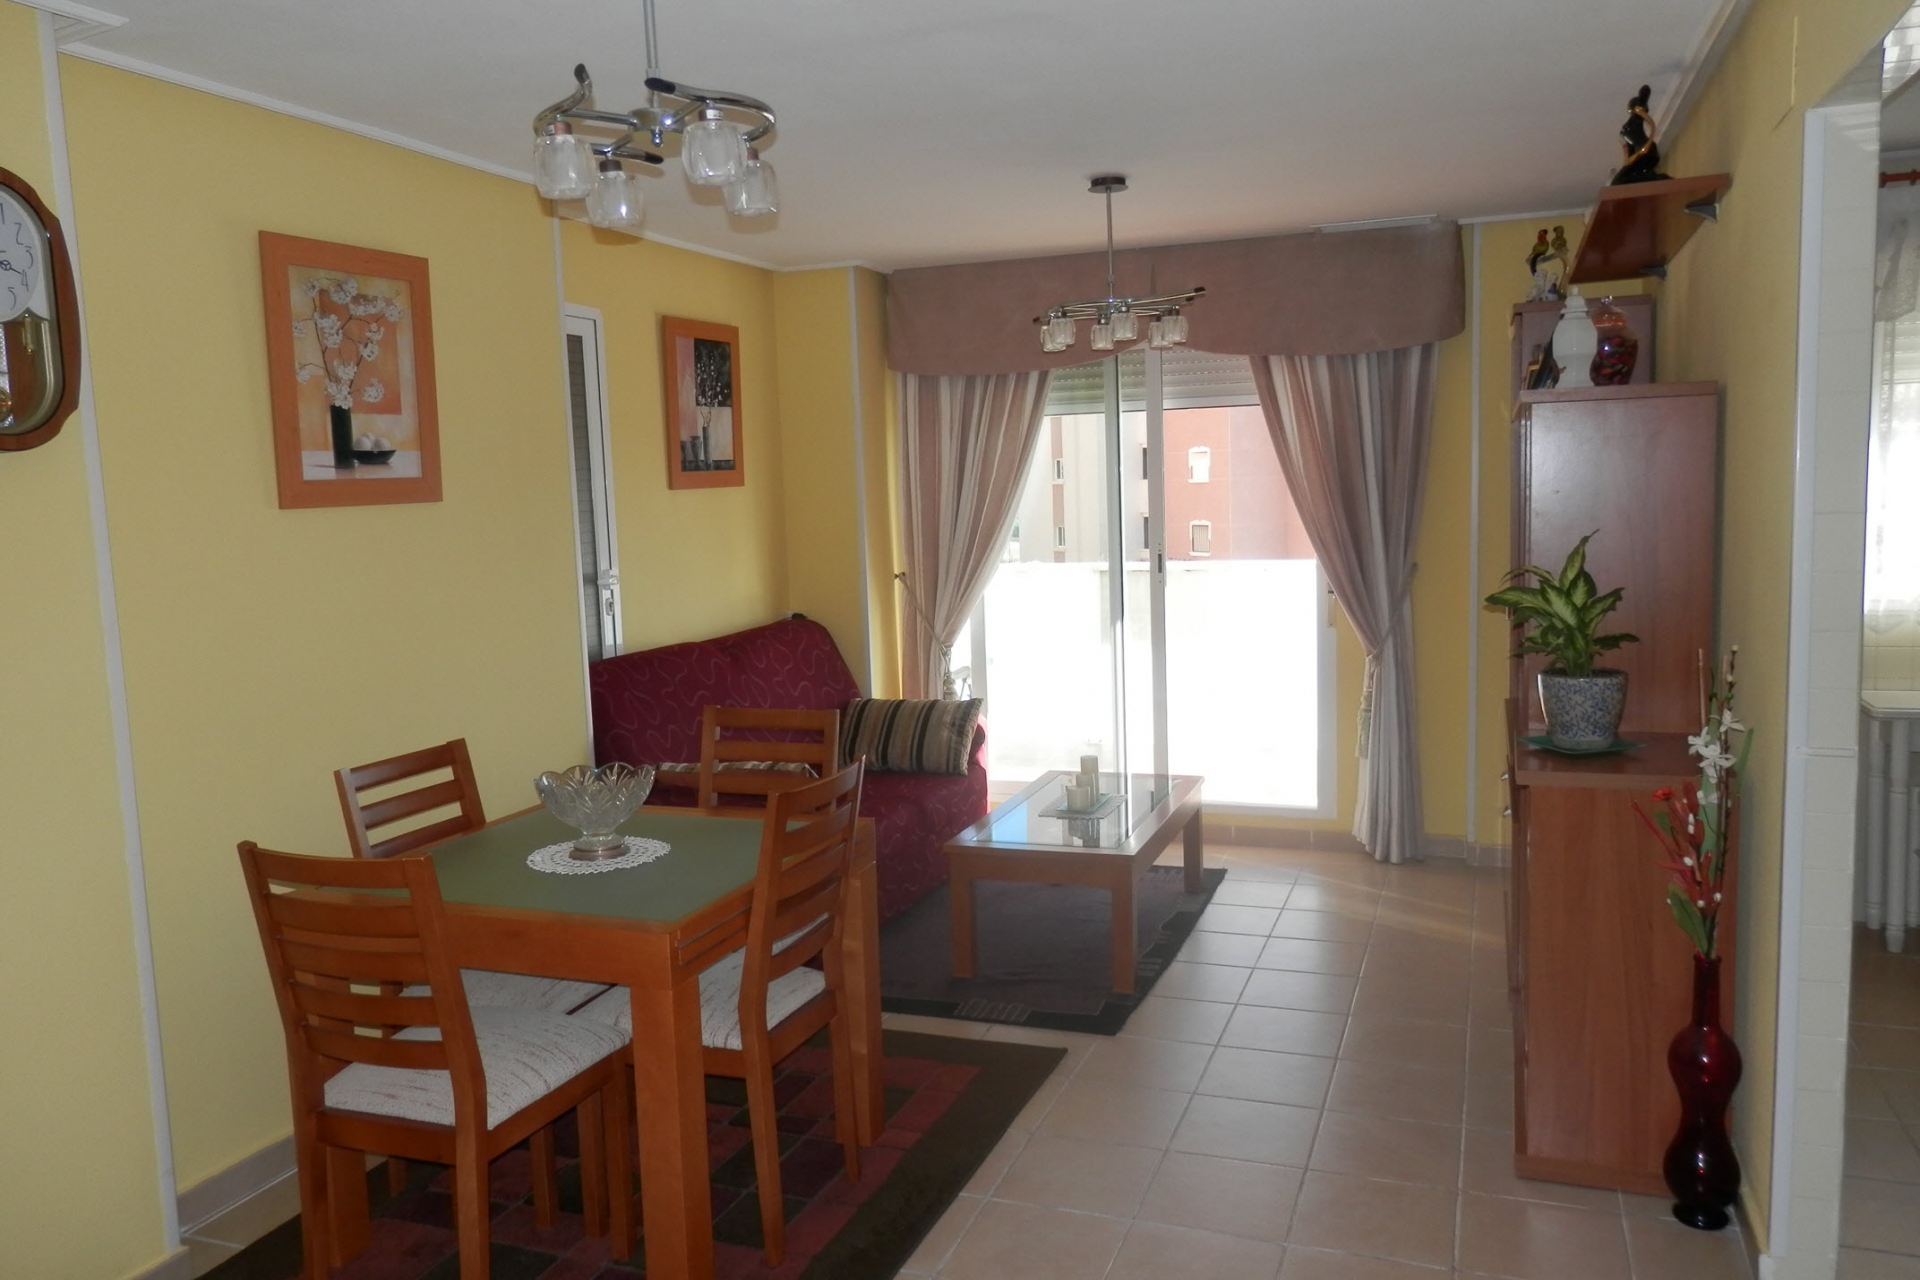 Property on Hold - Apartment for sale - Guardamar del Segura - Guardamar del Segura - Town Centre